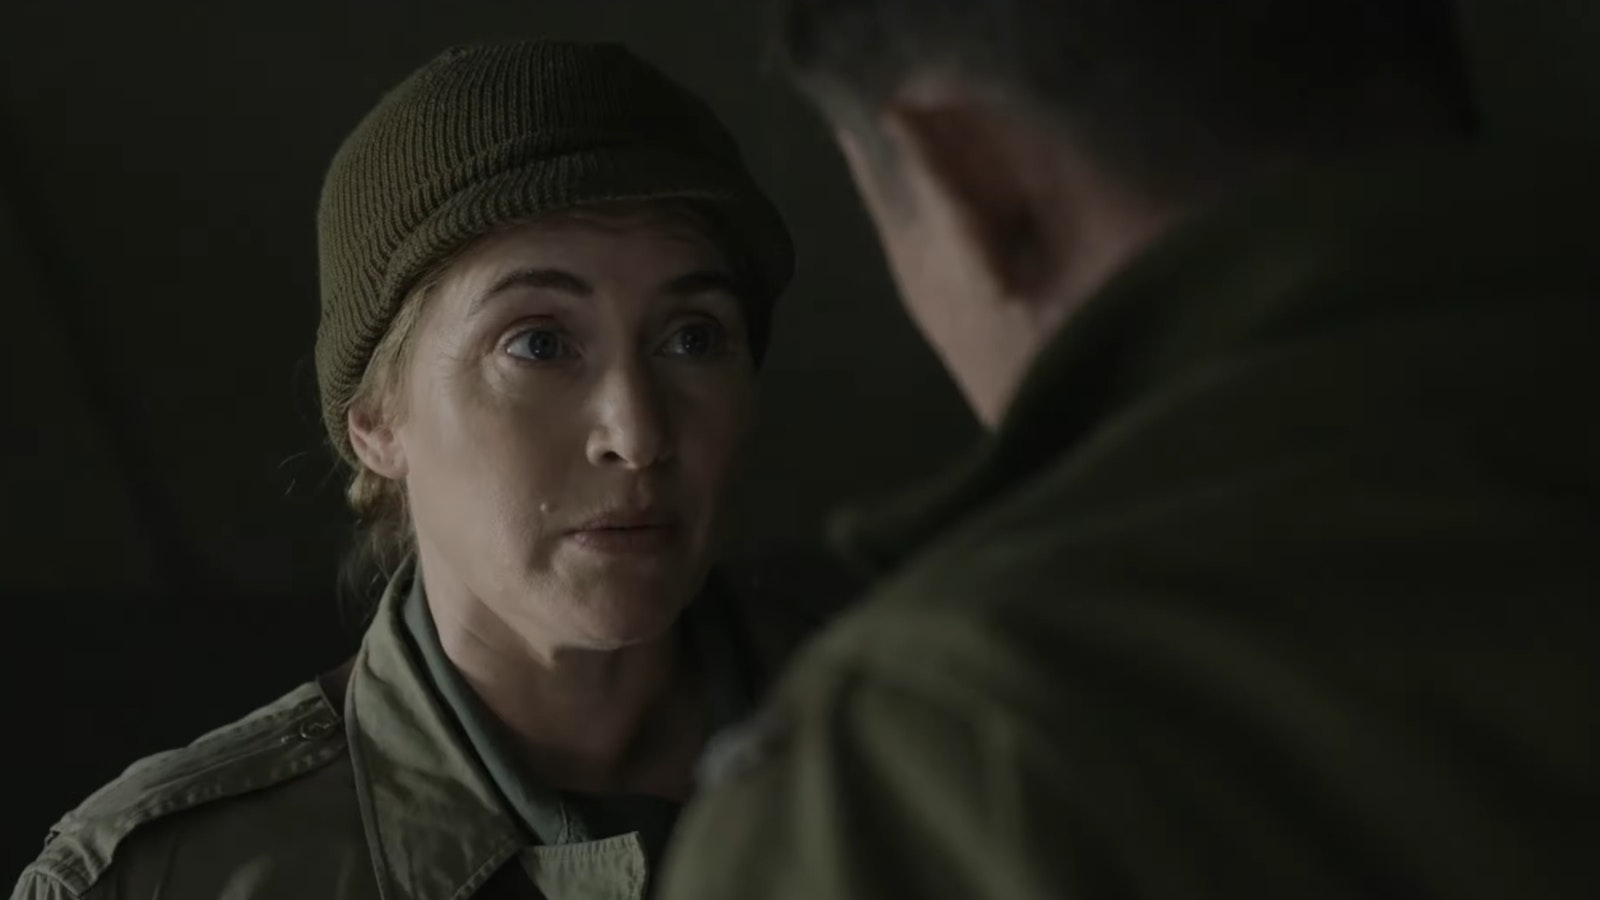 Kate Winslet is a war photographer at the front in this biopic about World War II